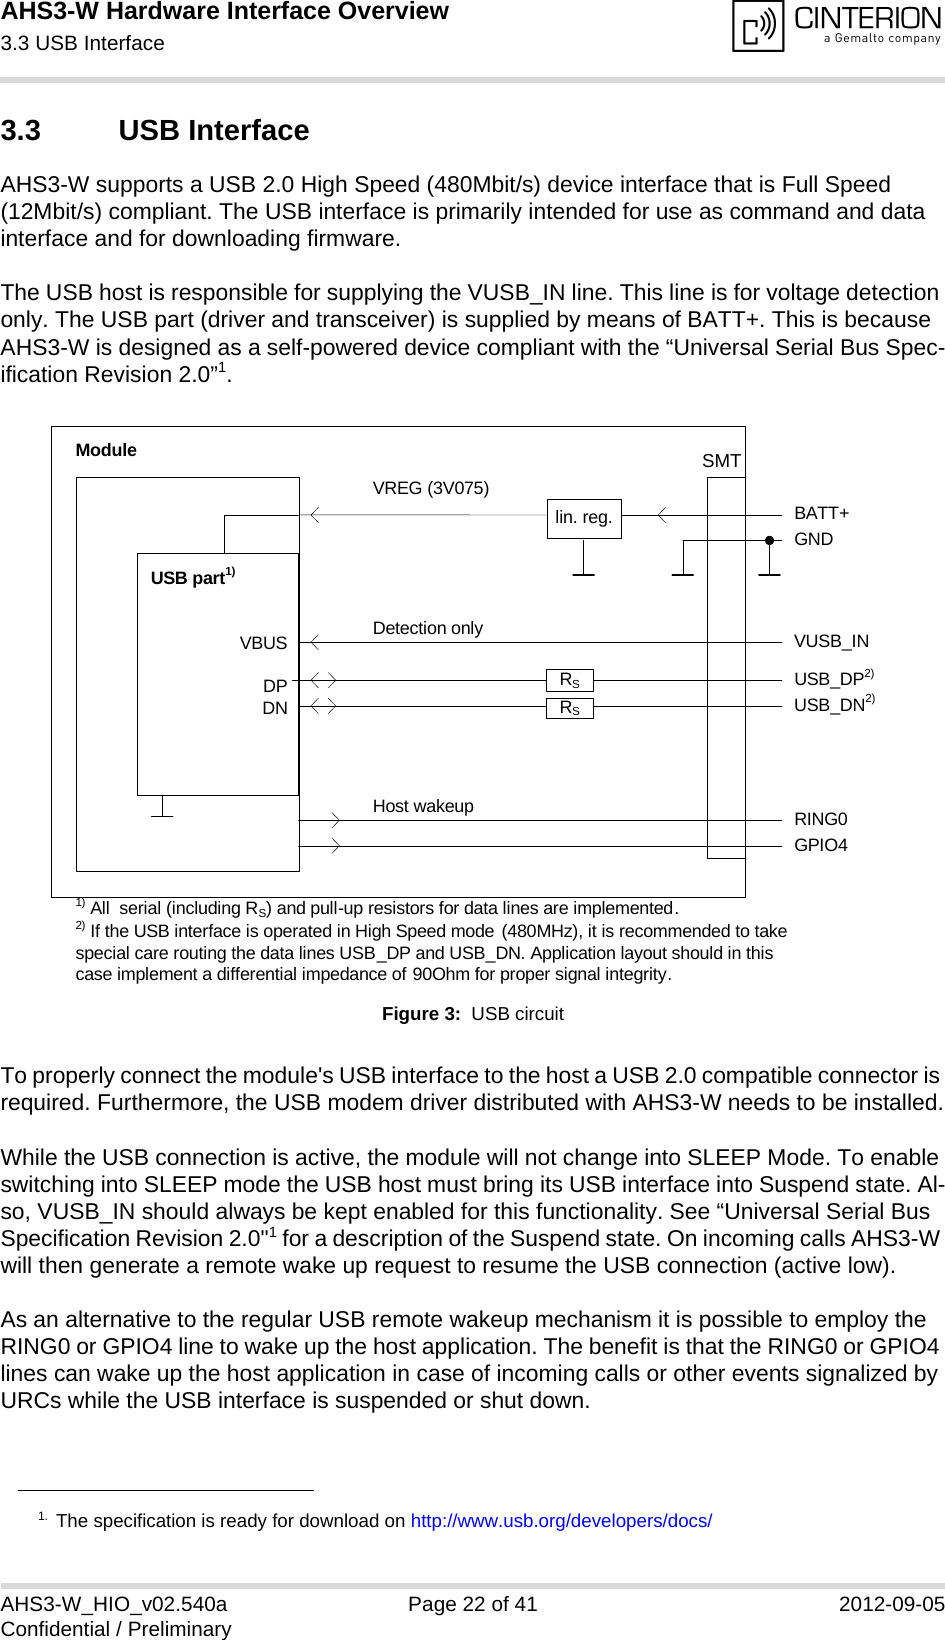 AHS3-W Hardware Interface Overview3.3 USB Interface28AHS3-W_HIO_v02.540a Page 22 of 41 2012-09-05Confidential / Preliminary3.3 USB InterfaceAHS3-W supports a USB 2.0 High Speed (480Mbit/s) device interface that is Full Speed (12Mbit/s) compliant. The USB interface is primarily intended for use as command and data interface and for downloading firmware. The USB host is responsible for supplying the VUSB_IN line. This line is for voltage detection only. The USB part (driver and transceiver) is supplied by means of BATT+. This is because AHS3-W is designed as a self-powered device compliant with the “Universal Serial Bus Spec-ification Revision 2.0”1.Figure 3:  USB circuitTo properly connect the module&apos;s USB interface to the host a USB 2.0 compatible connector is required. Furthermore, the USB modem driver distributed with AHS3-W needs to be installed.While the USB connection is active, the module will not change into SLEEP Mode. To enable switching into SLEEP mode the USB host must bring its USB interface into Suspend state. Al-so, VUSB_IN should always be kept enabled for this functionality. See “Universal Serial Bus Specification Revision 2.0&quot;1 for a description of the Suspend state. On incoming calls AHS3-W will then generate a remote wake up request to resume the USB connection (active low).As an alternative to the regular USB remote wakeup mechanism it is possible to employ the RING0 or GPIO4 line to wake up the host application. The benefit is that the RING0 or GPIO4 lines can wake up the host application in case of incoming calls or other events signalized by URCs while the USB interface is suspended or shut down. 1. The specification is ready for download on http://www.usb.org/developers/docs/VBUSDPDNVREG (3V075)BATT+USB_DP2)lin. reg. GNDModuleDetection only VUSB_INUSB part1)RING0Host wakeup1) All  serial (including RS) and pull-up resistors for data lines are implemented.USB_DN2)2) If the USB interface is operated in High Speed mode (480MHz), it is recommended to take special care routing the data lines USB_DP and USB_DN. Application layout should in this case implement a differential impedance of 90Ohm for proper signal integrity.GPIO4RSRSSMT